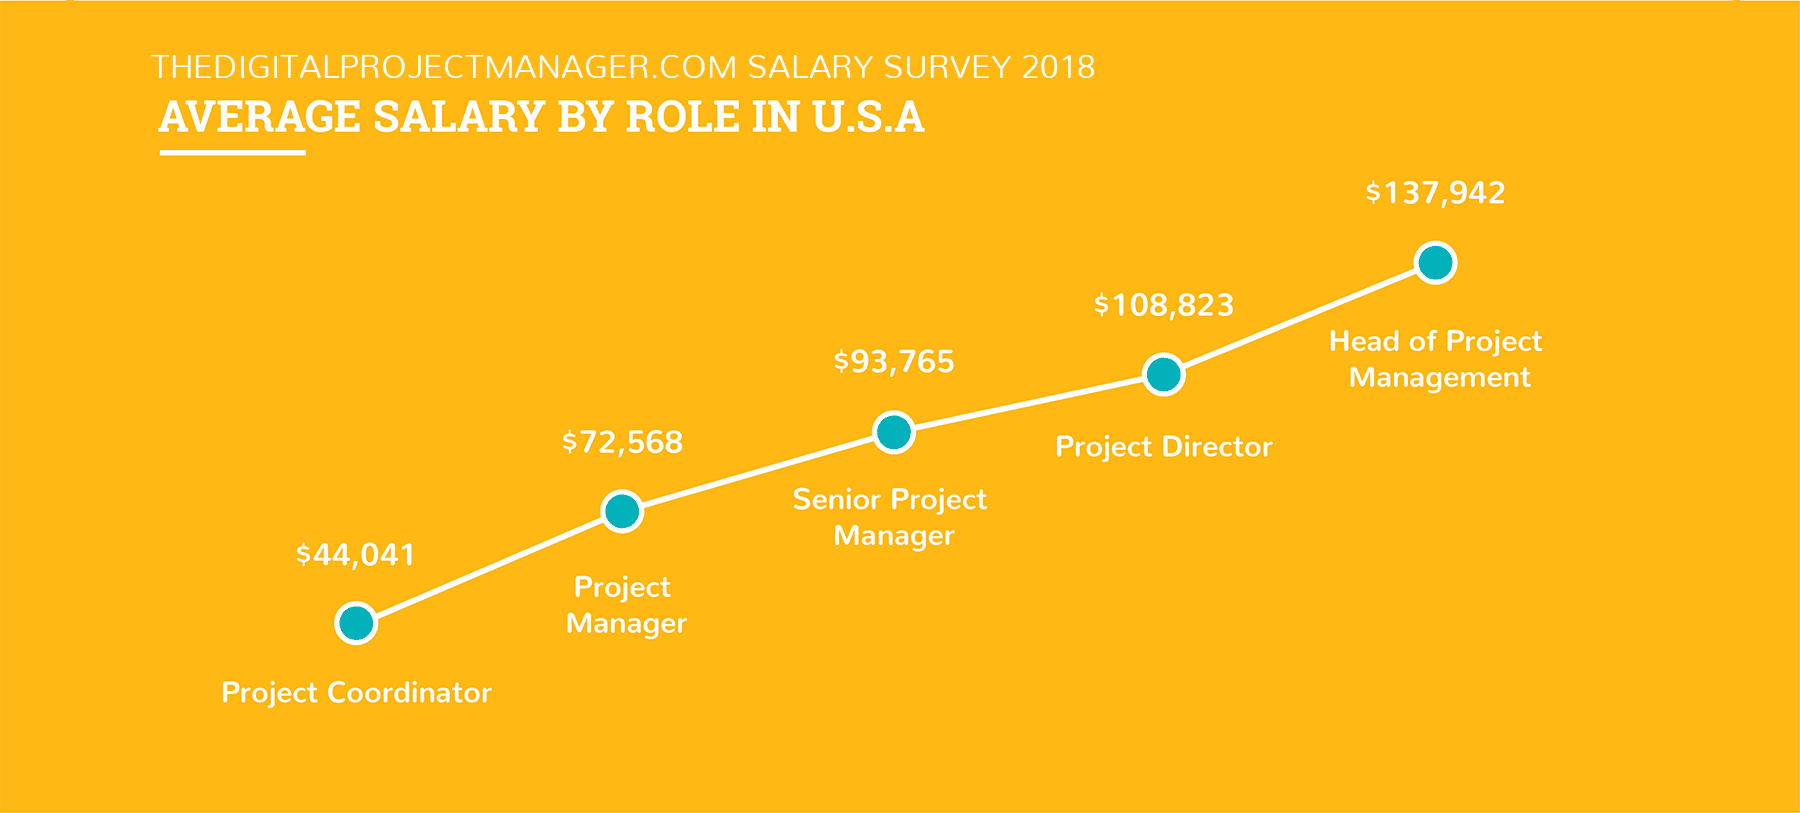 Digital project manager salary 2018 - united states